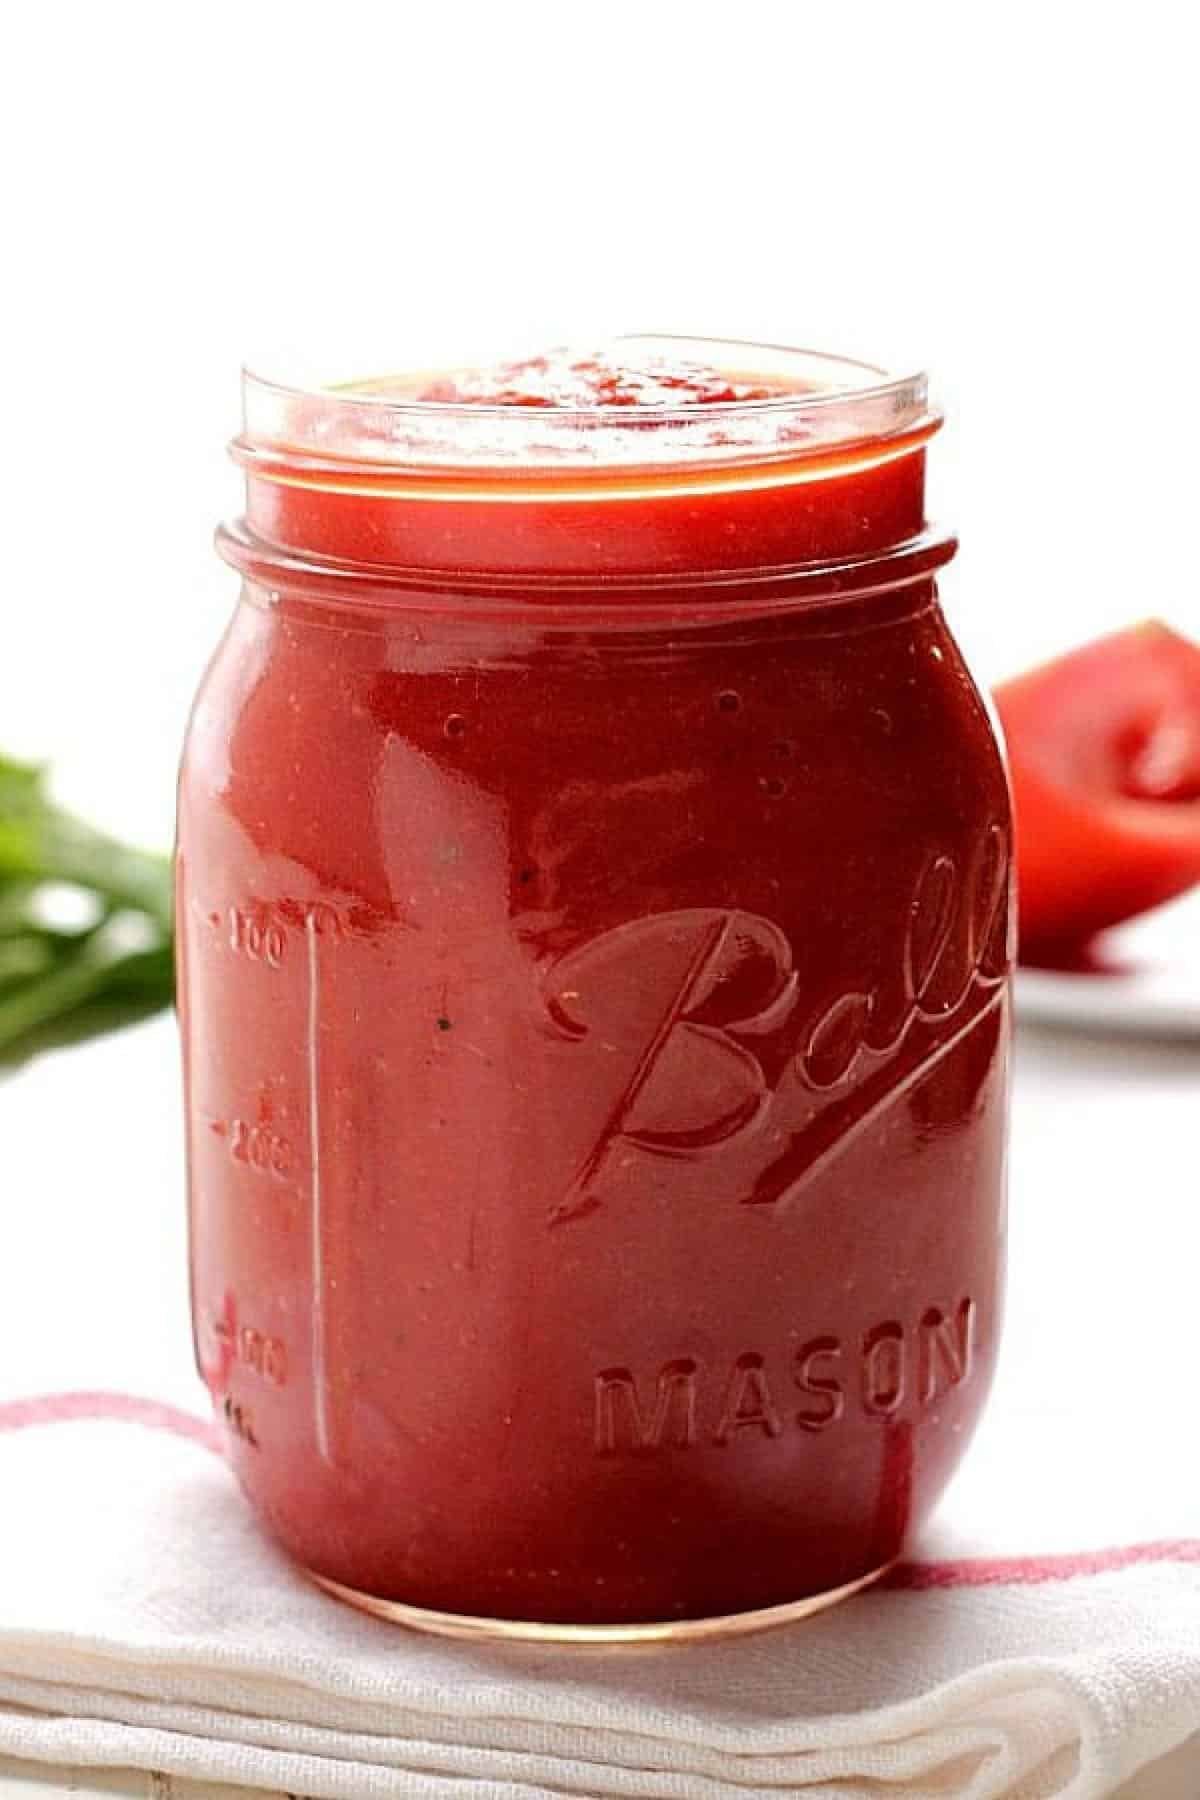 Pizza sauce in a glass jar on white kitchen towel.